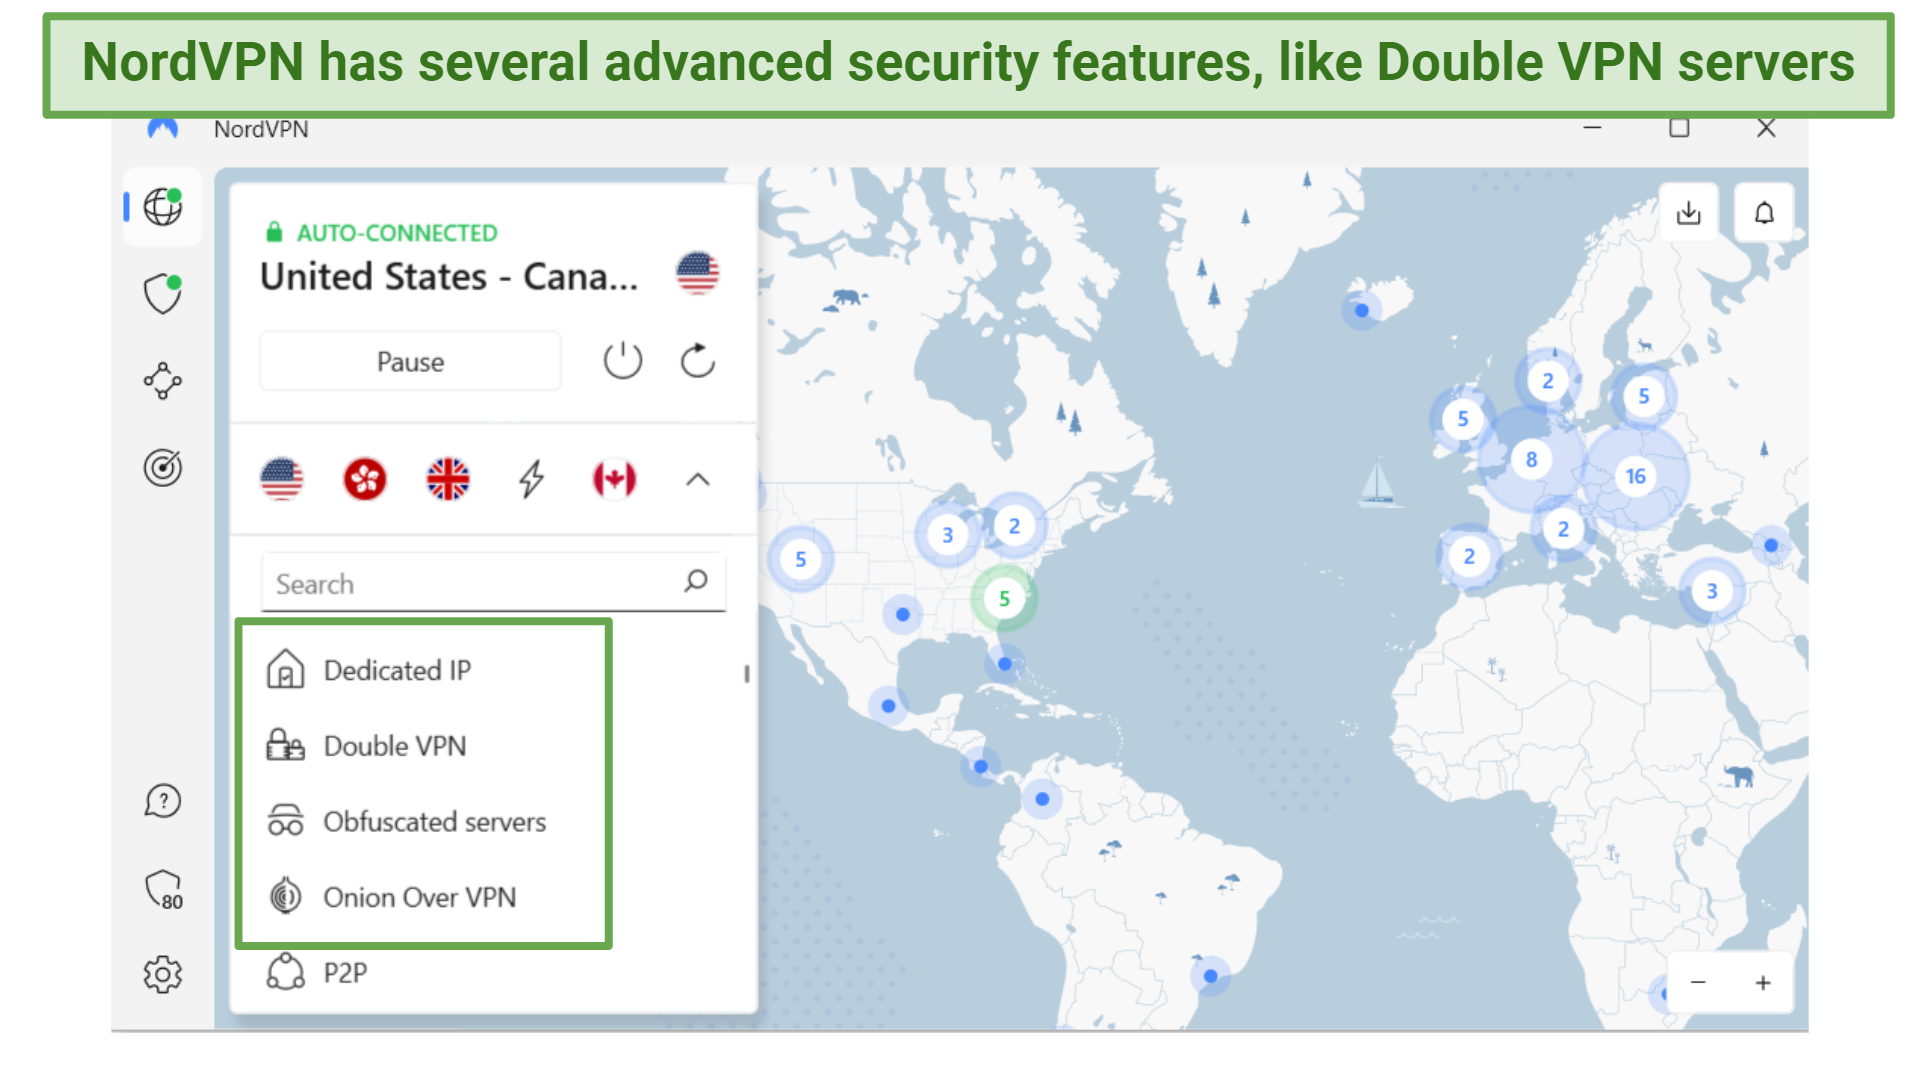 Screenshot showing NordVPN's specialized secure servers